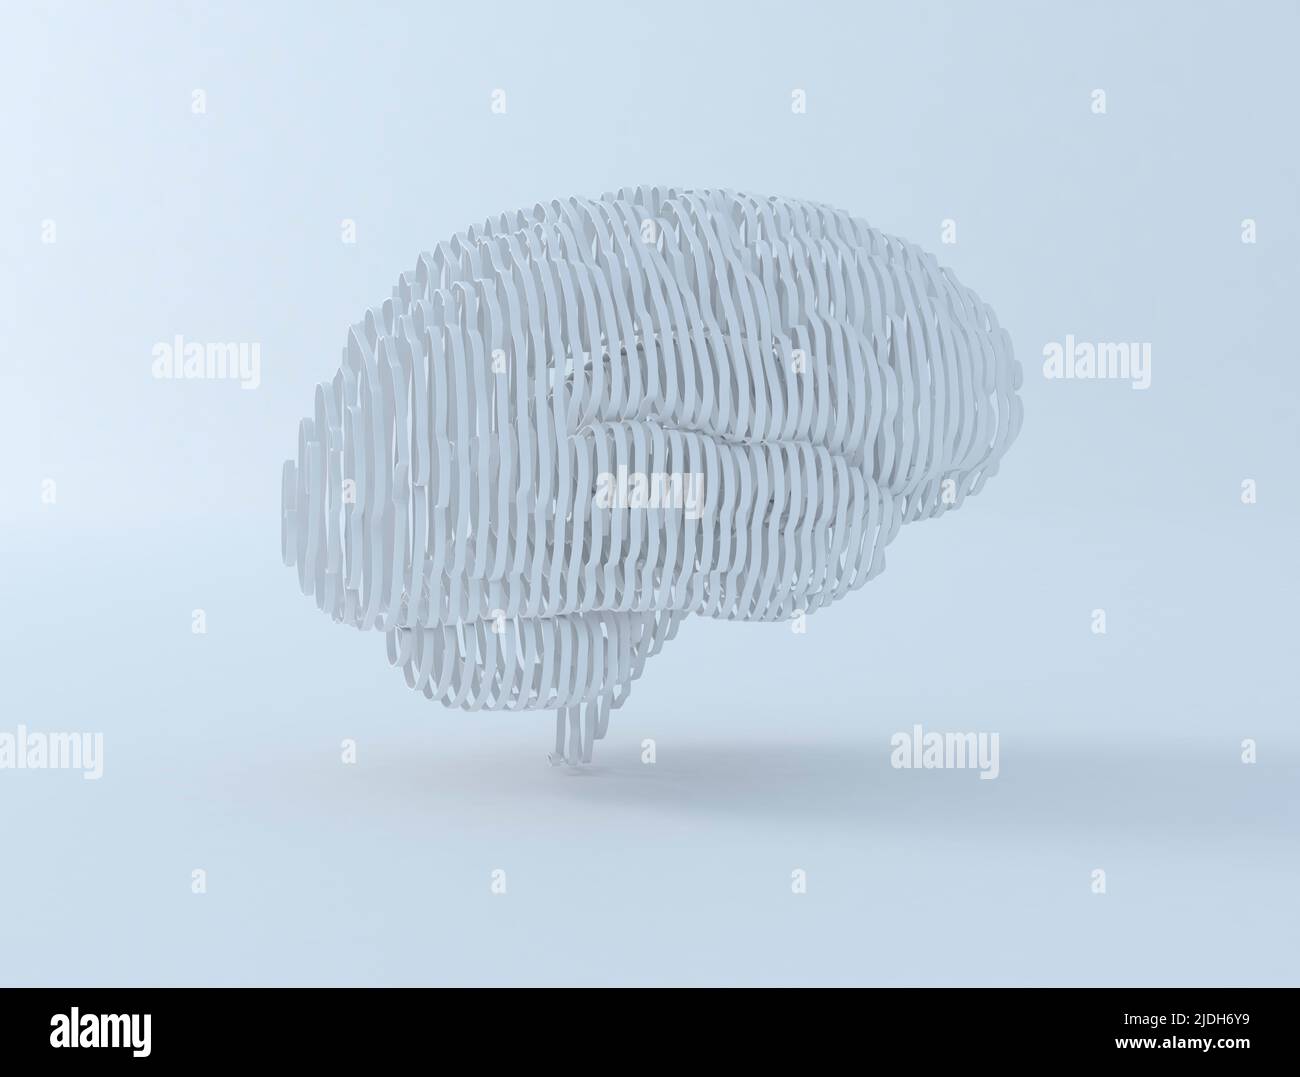 3d Illustration of a human brain consisting of sliced lines Stock Photo